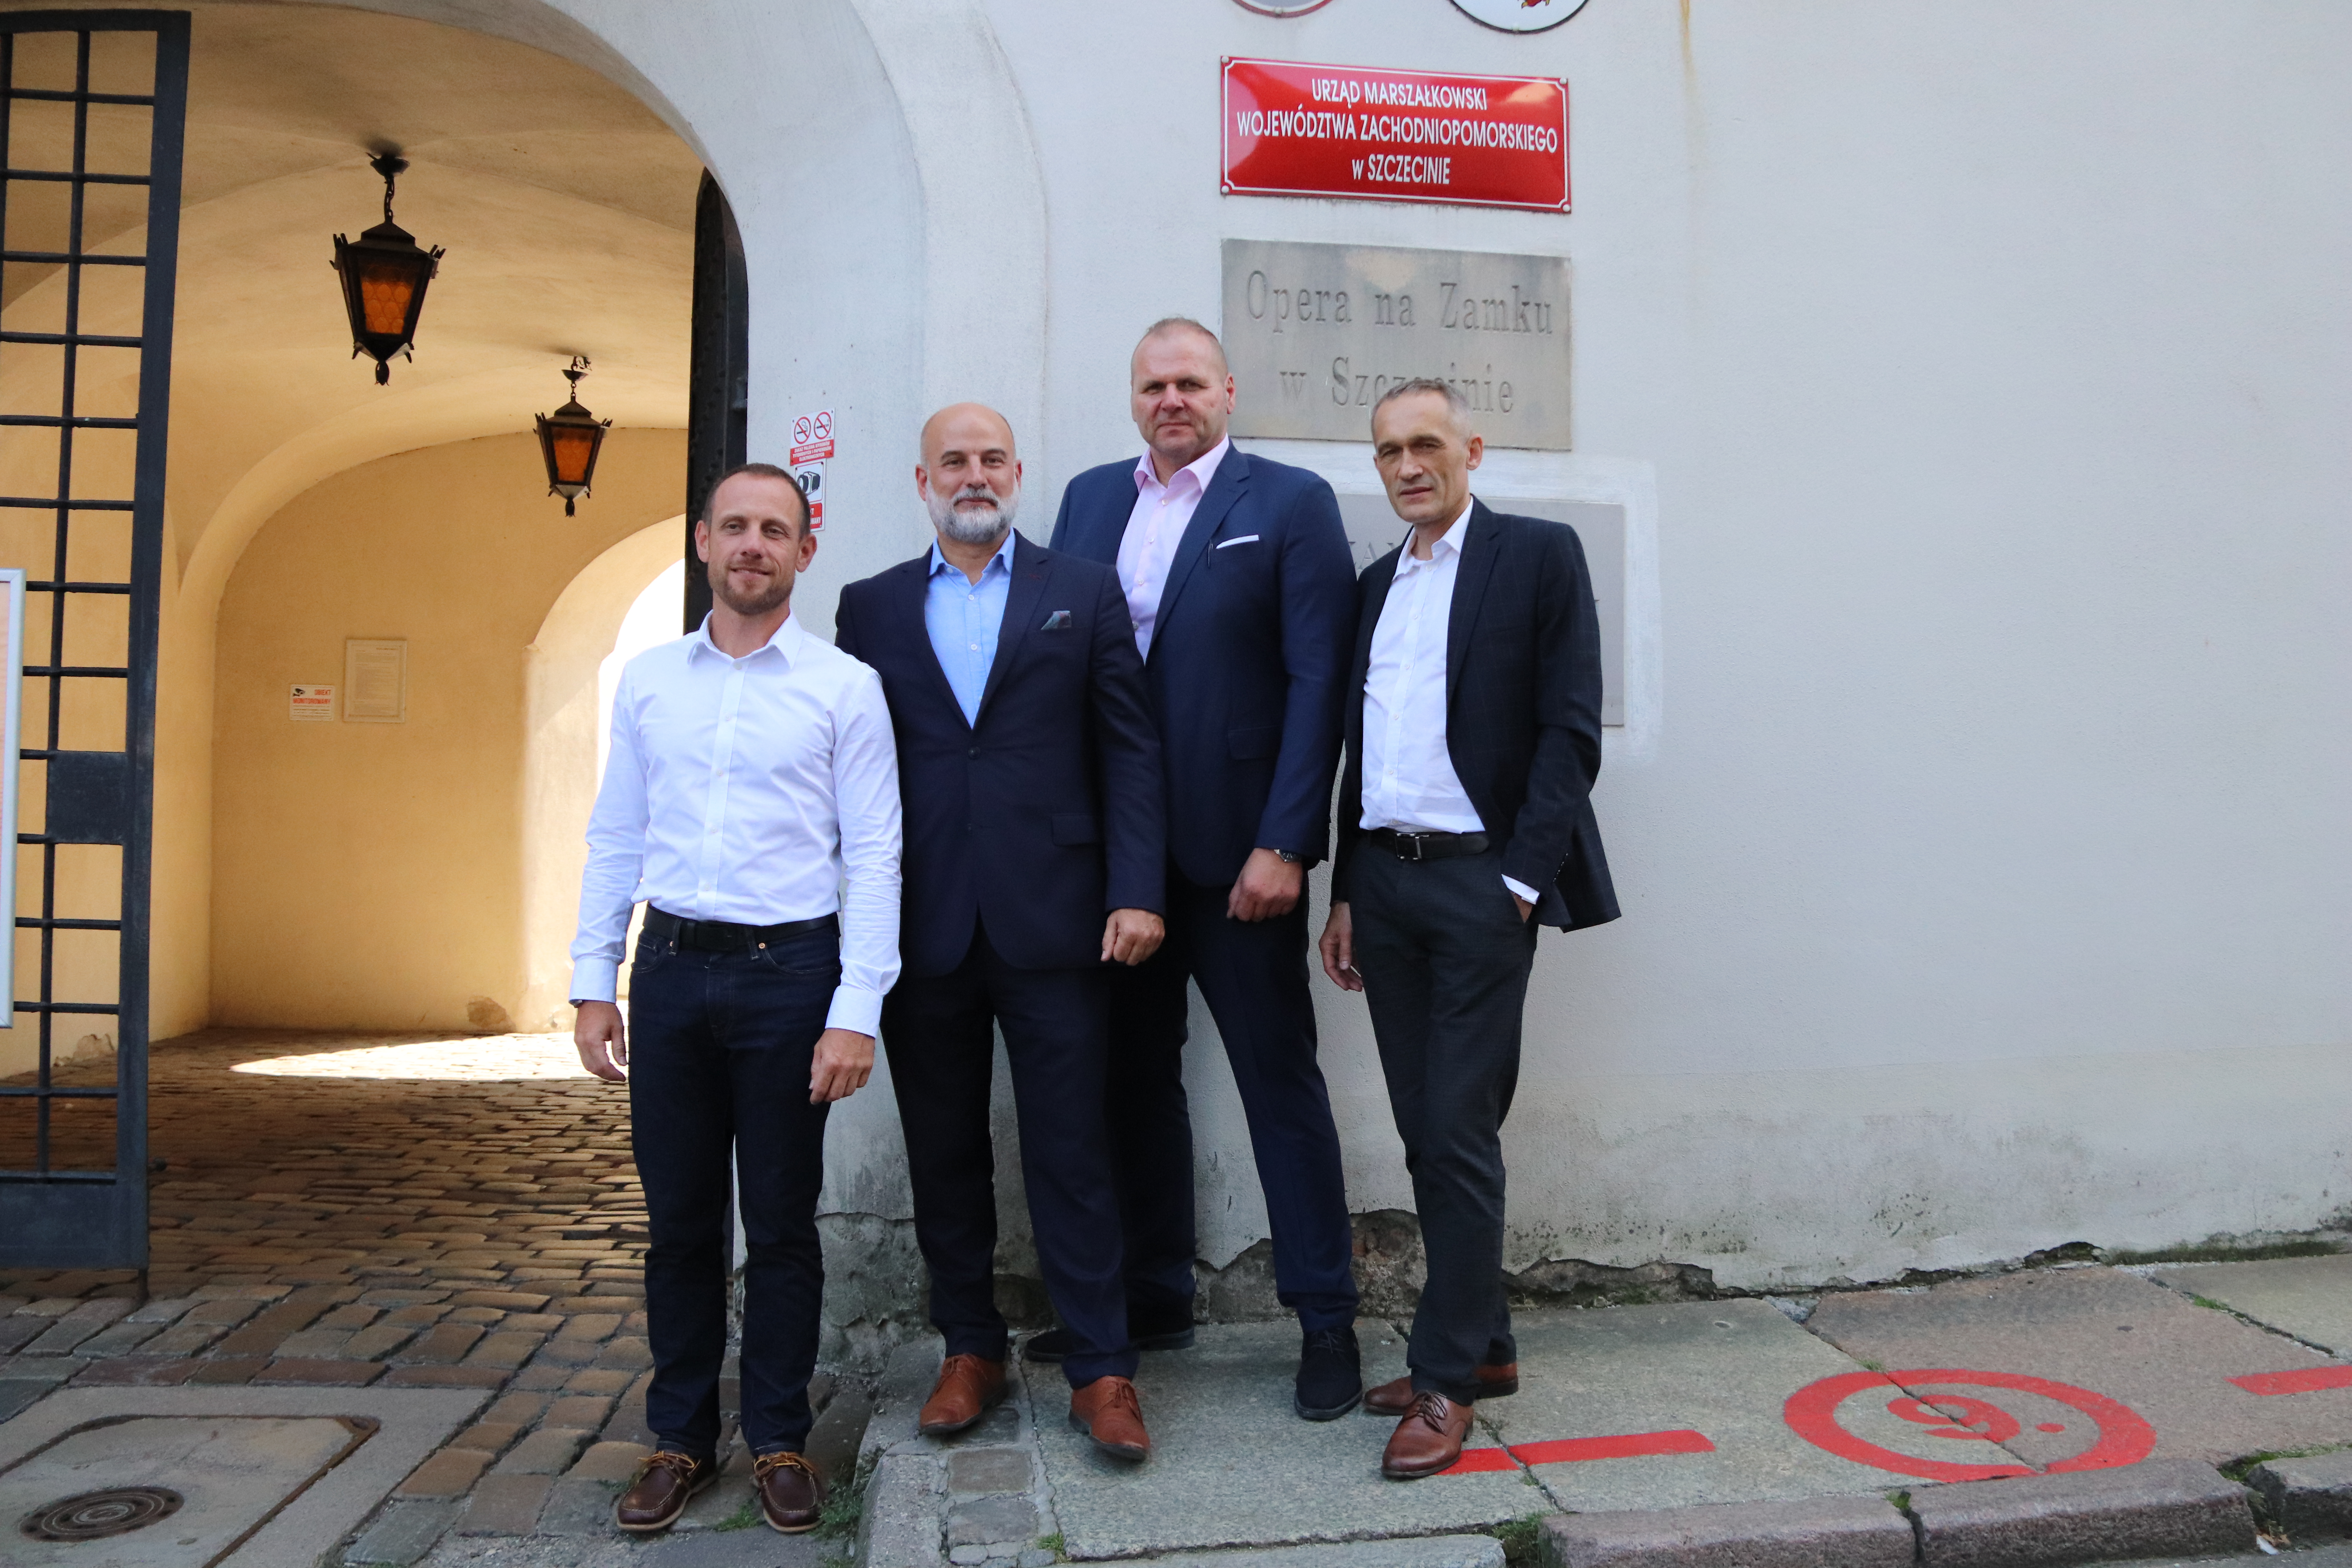 In the photo (from the left): Marcin Szymborski, Director of the Contracts Group, Jorge Calabuig Ferre, Marcin Sierpowski, Director of the Western Area, Zbigniew Przybyłowicz, Commercial Director. Photo MW.